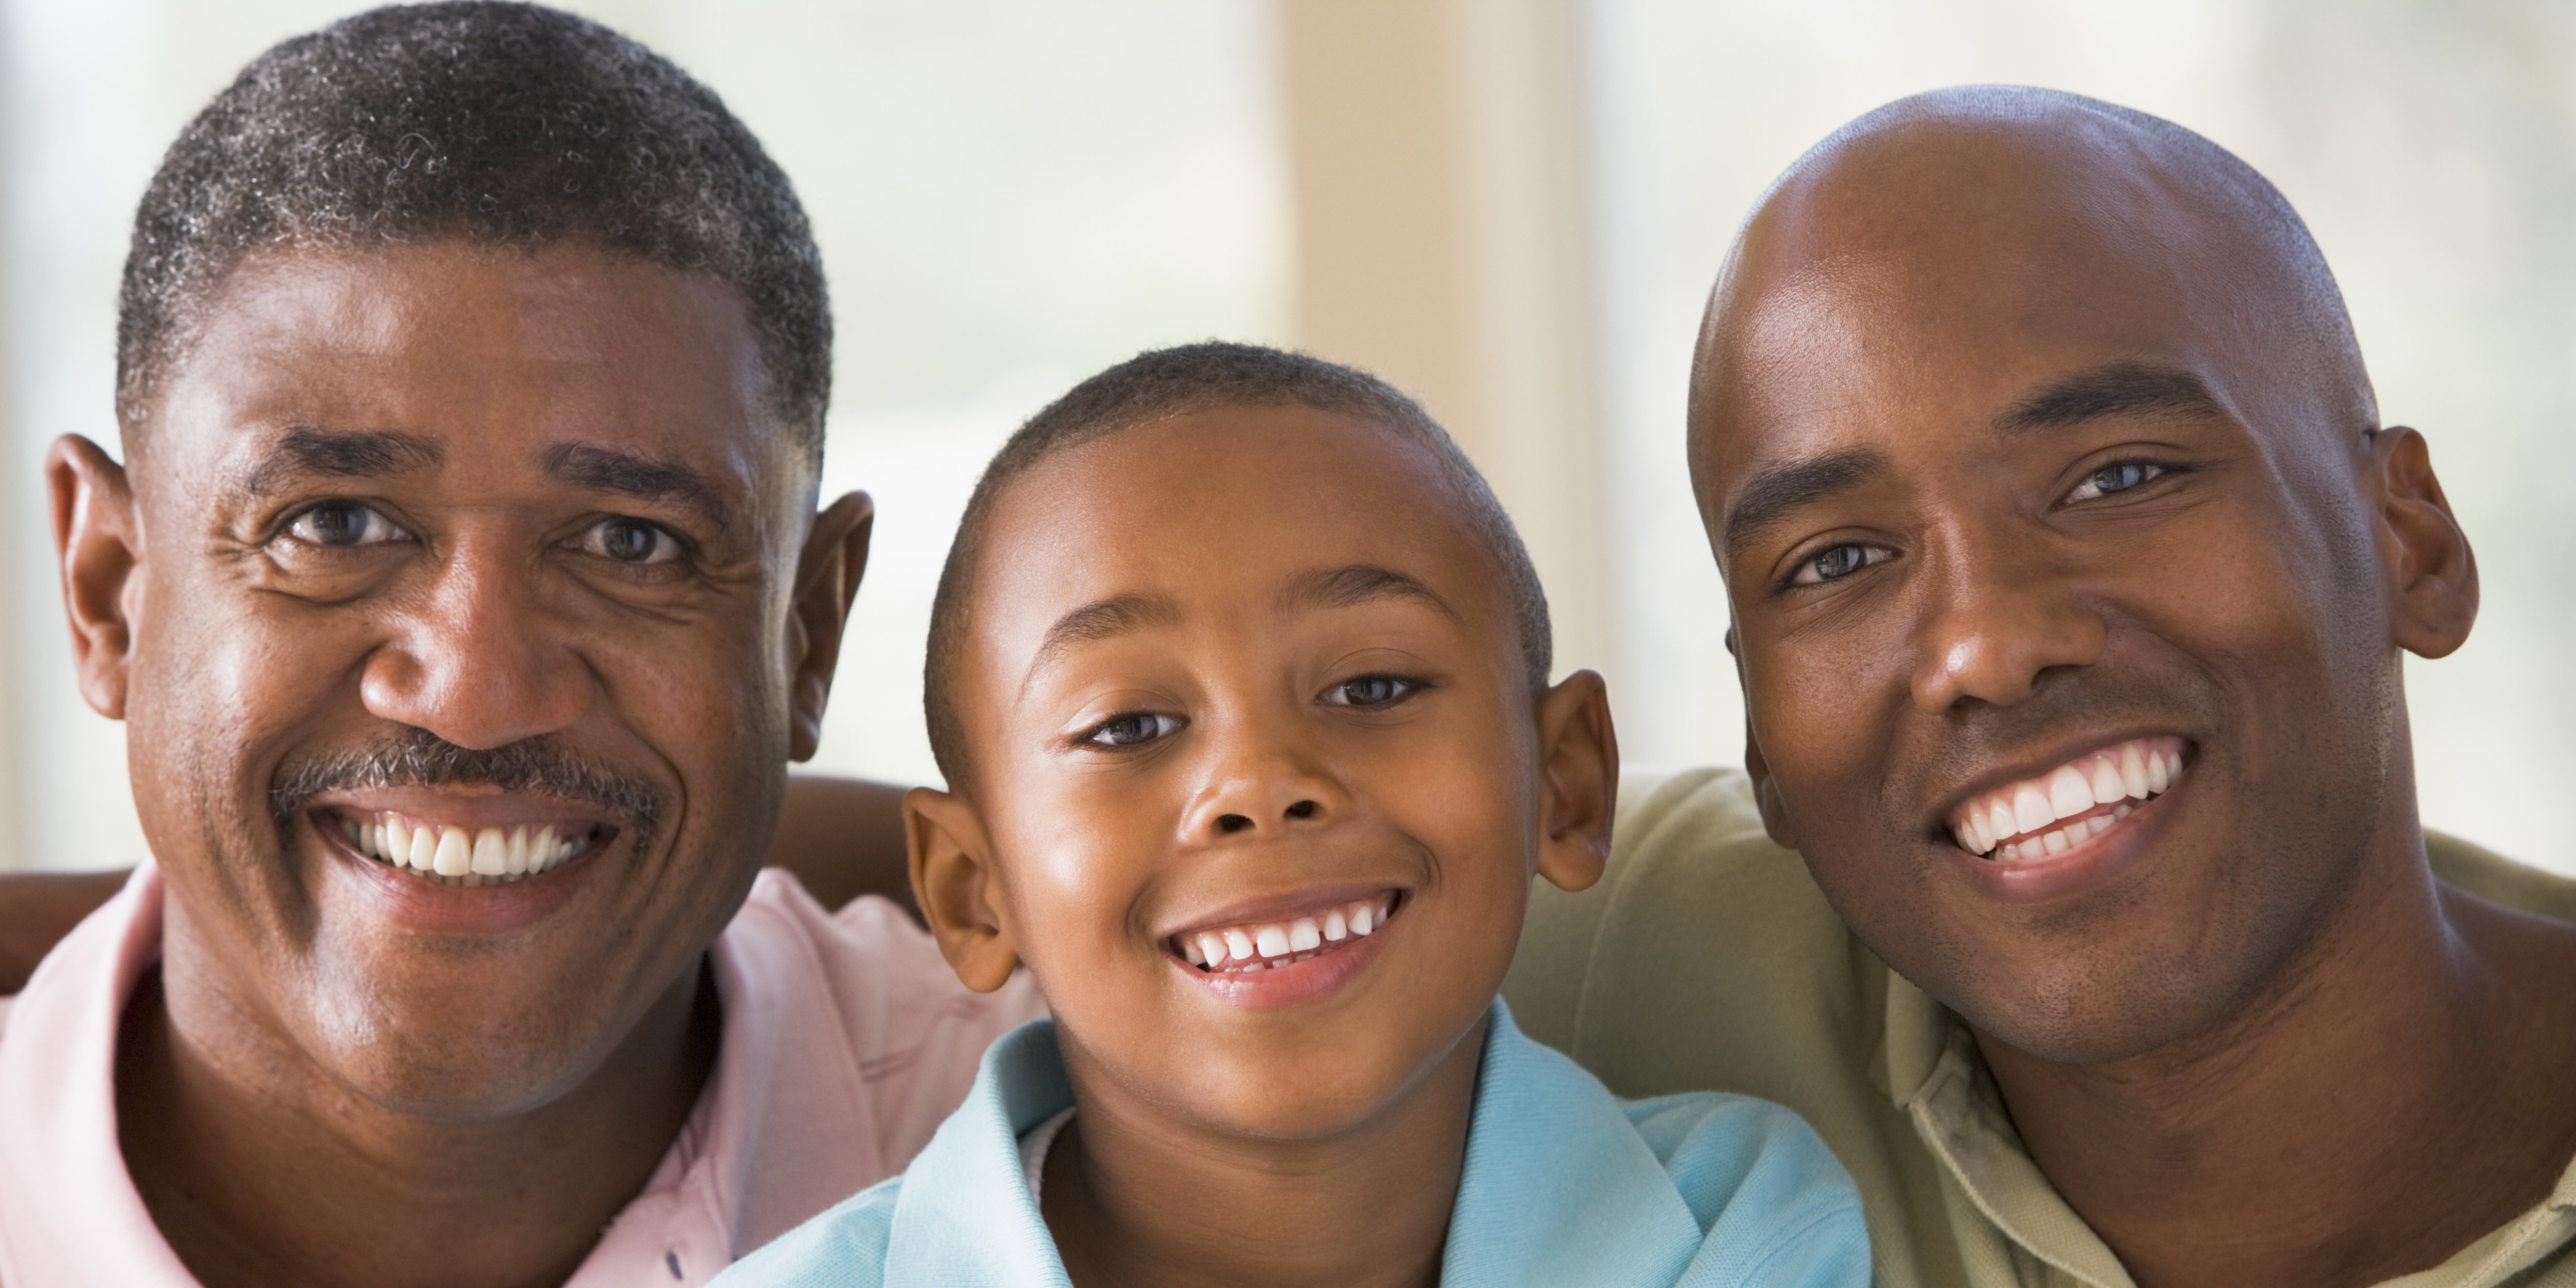 Older man, boy, and man who are happy with the dentists and dental service at Family Dental Care in Temple Hills, MD